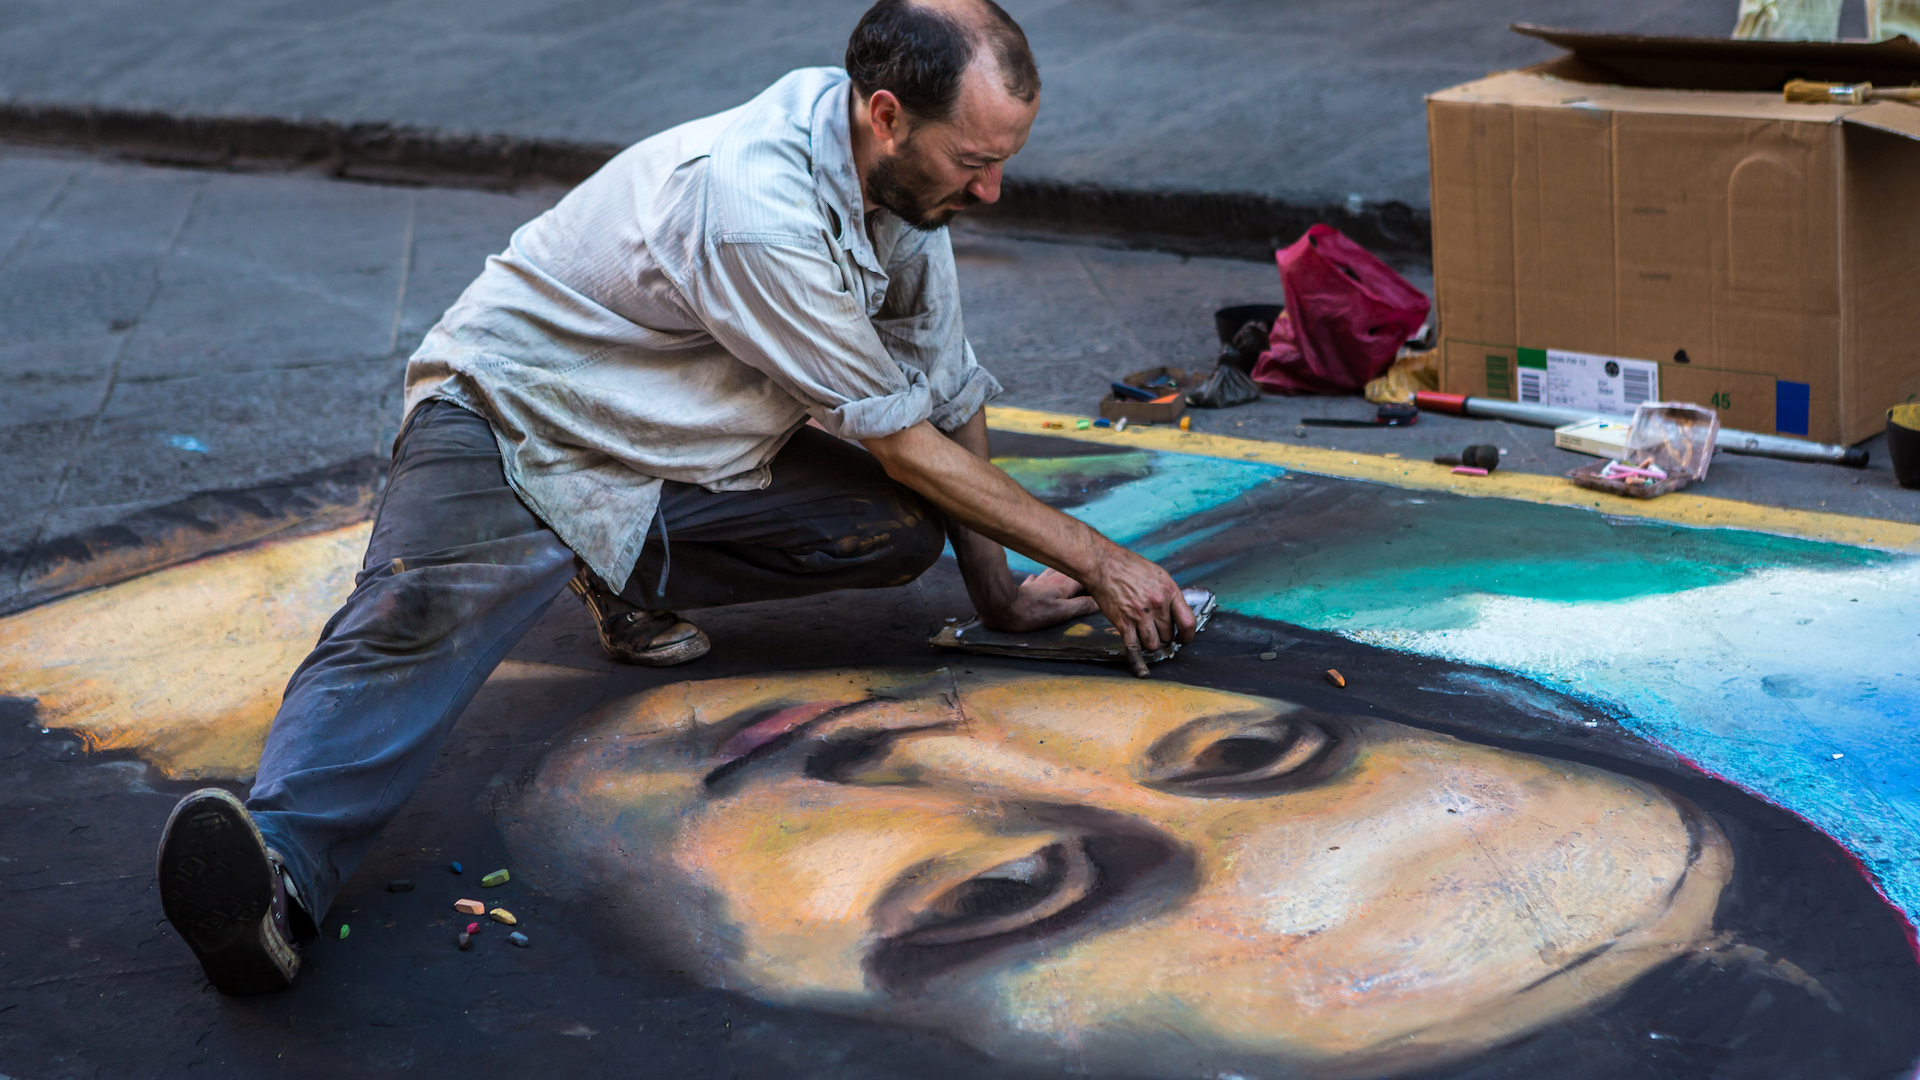 A street artist drawing on the pavement with chalk